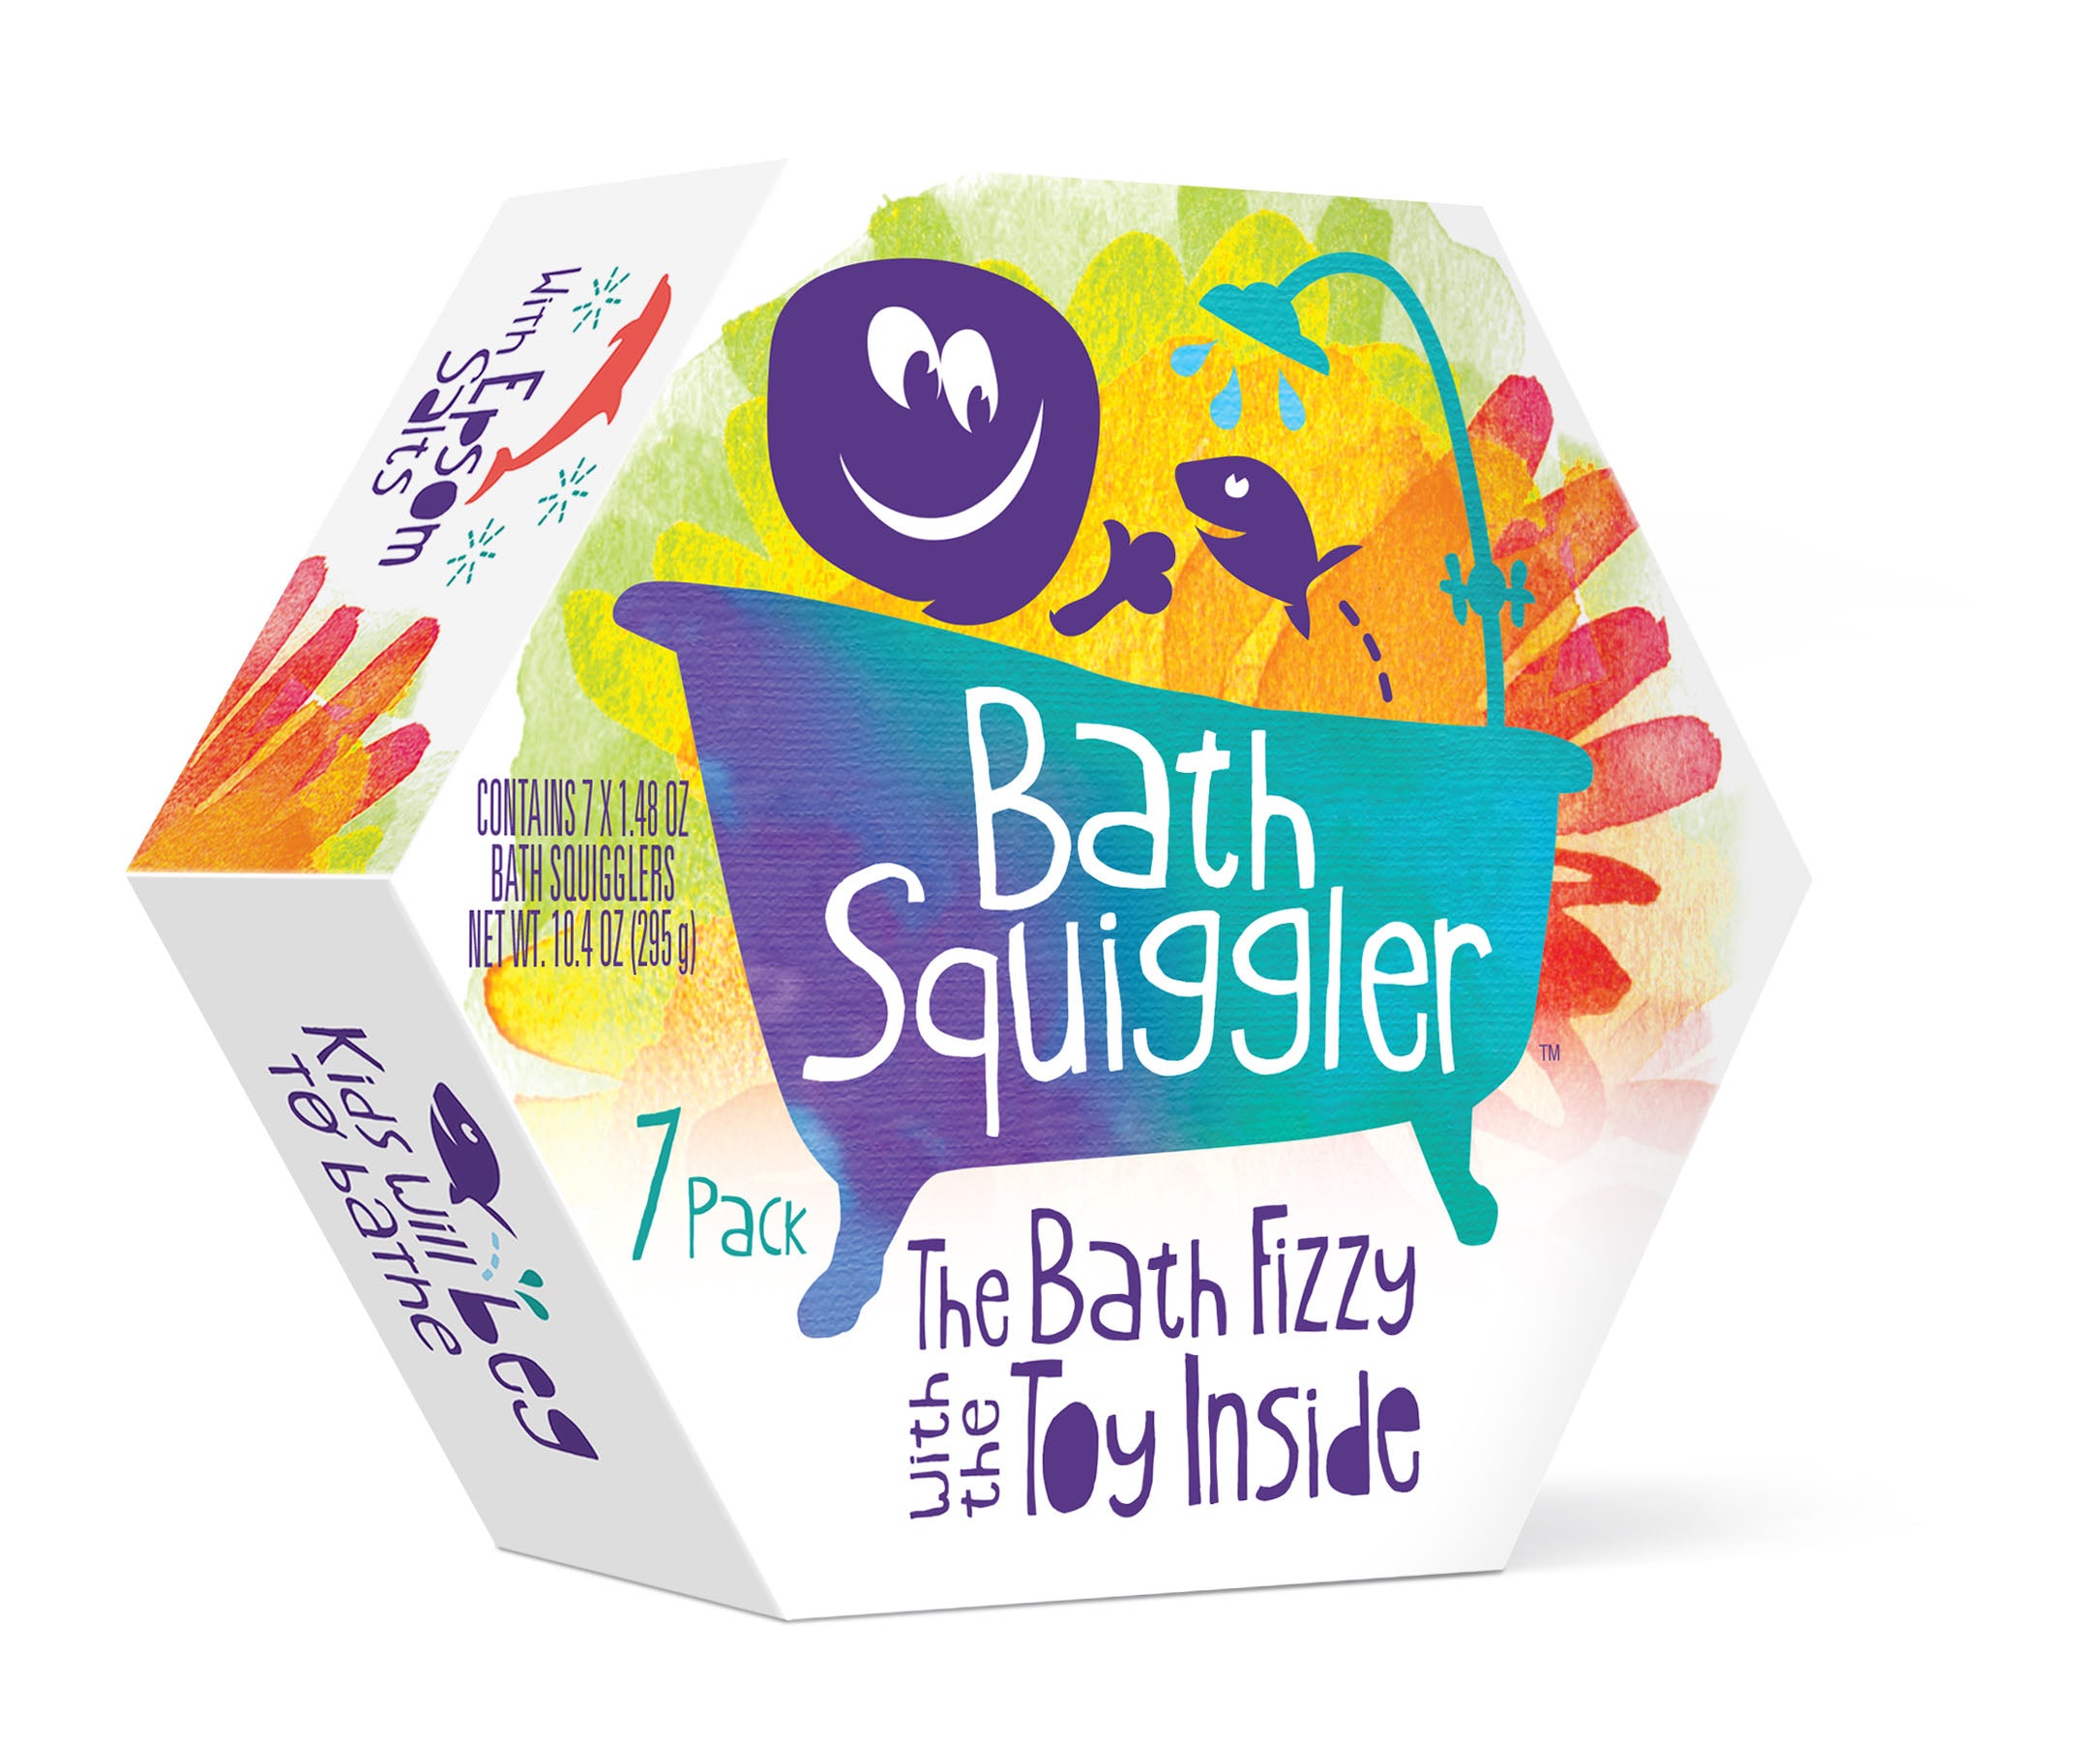 Bath Squiggler packaging that contains 7 x 1.48oz bath squigglers